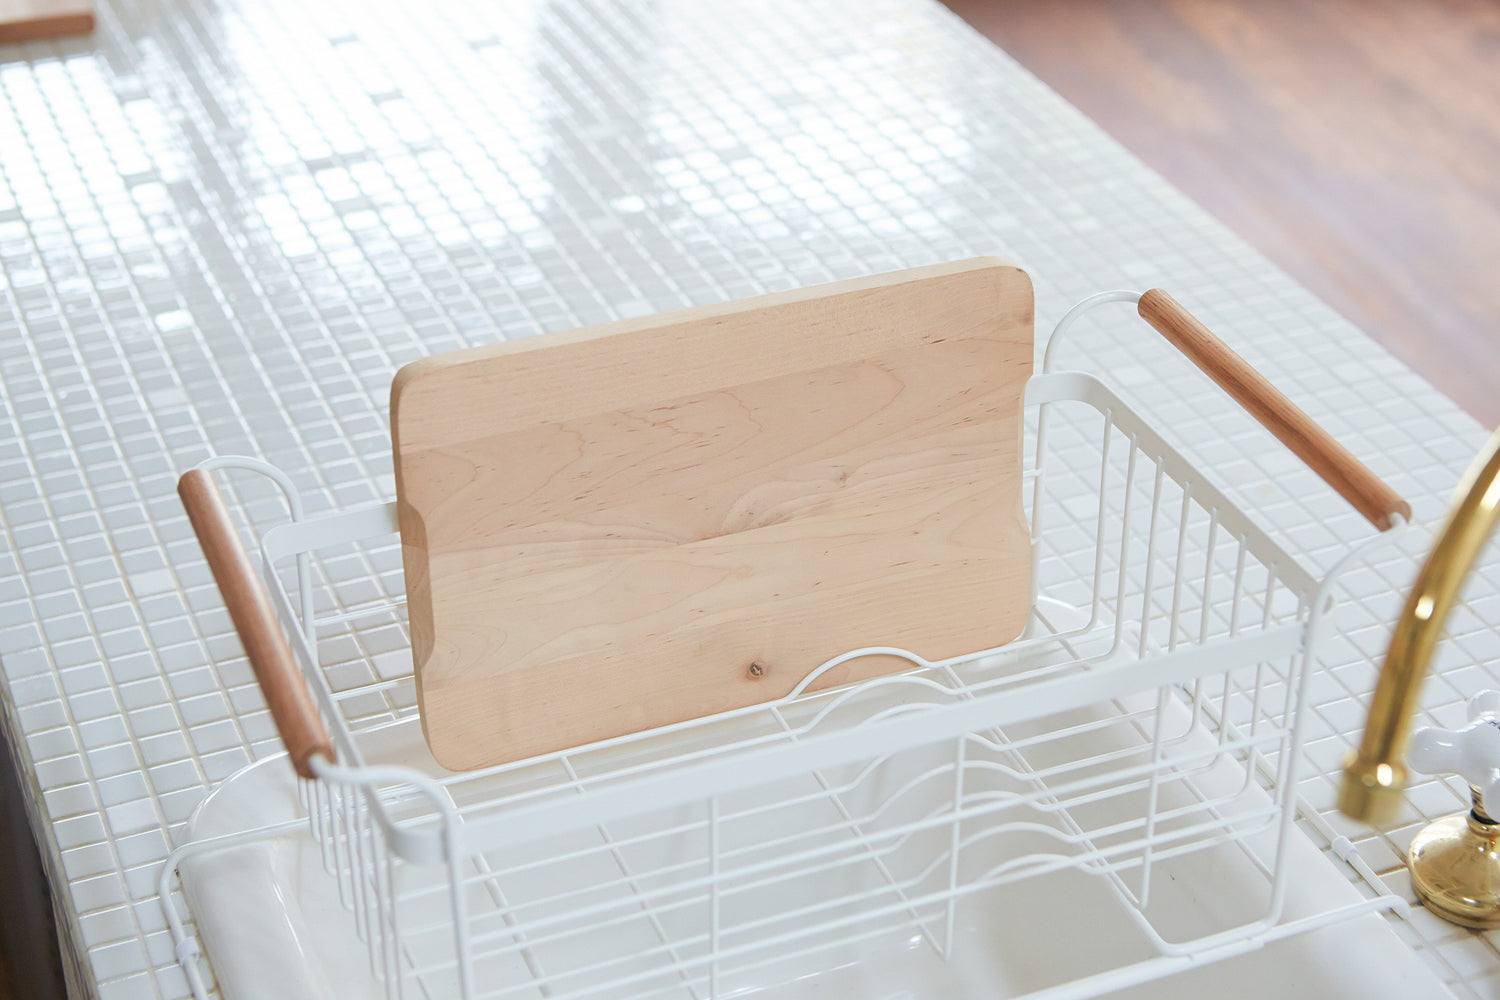 View 5 - White Over-the-Sink Expandable Dish Drying Rack holding cutting board in kitchen by Yamazaki Home.